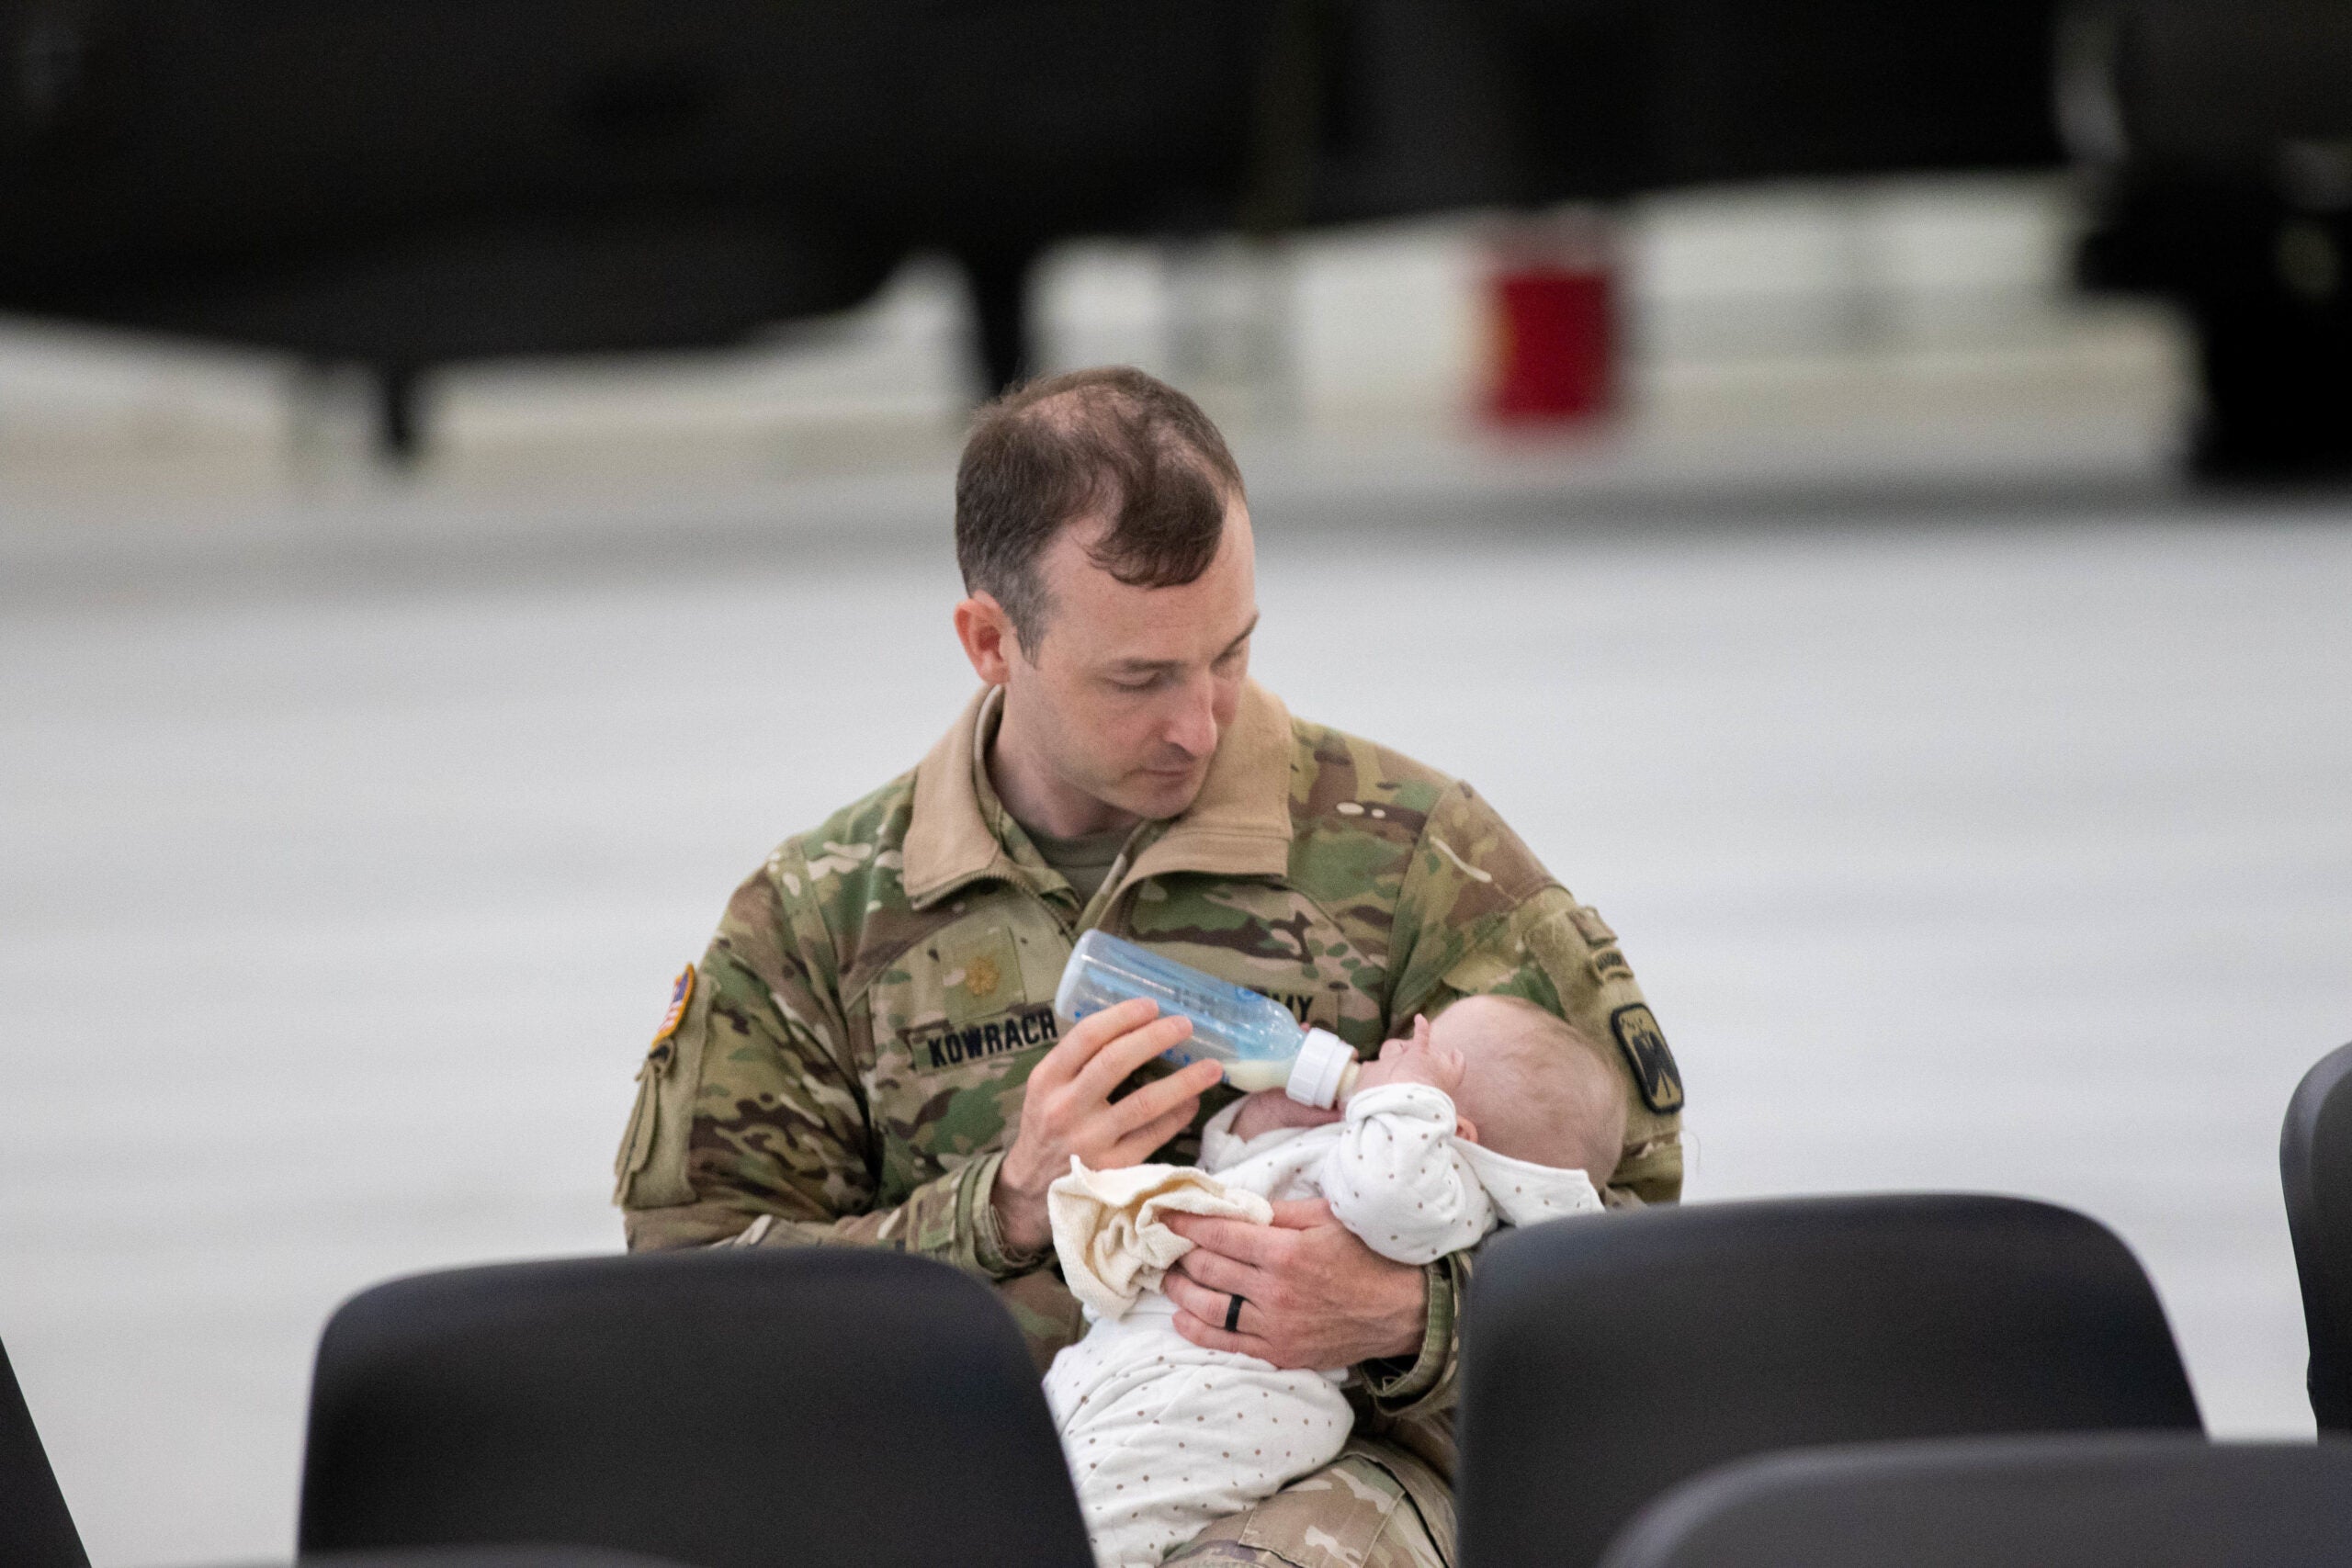 Maj. Jason Kowrach, the Brigade Operations Officer assigned to 16th Combat Aviation Brigade, cares for his baby while his spouse takes part in a spouse flight at Joint Base Lewis-McChord, Wash. on May 24 and 25, 2022. (U.S. Army photo by Capt. Kyle Abraham, 16th Combat Aviation Brigade)